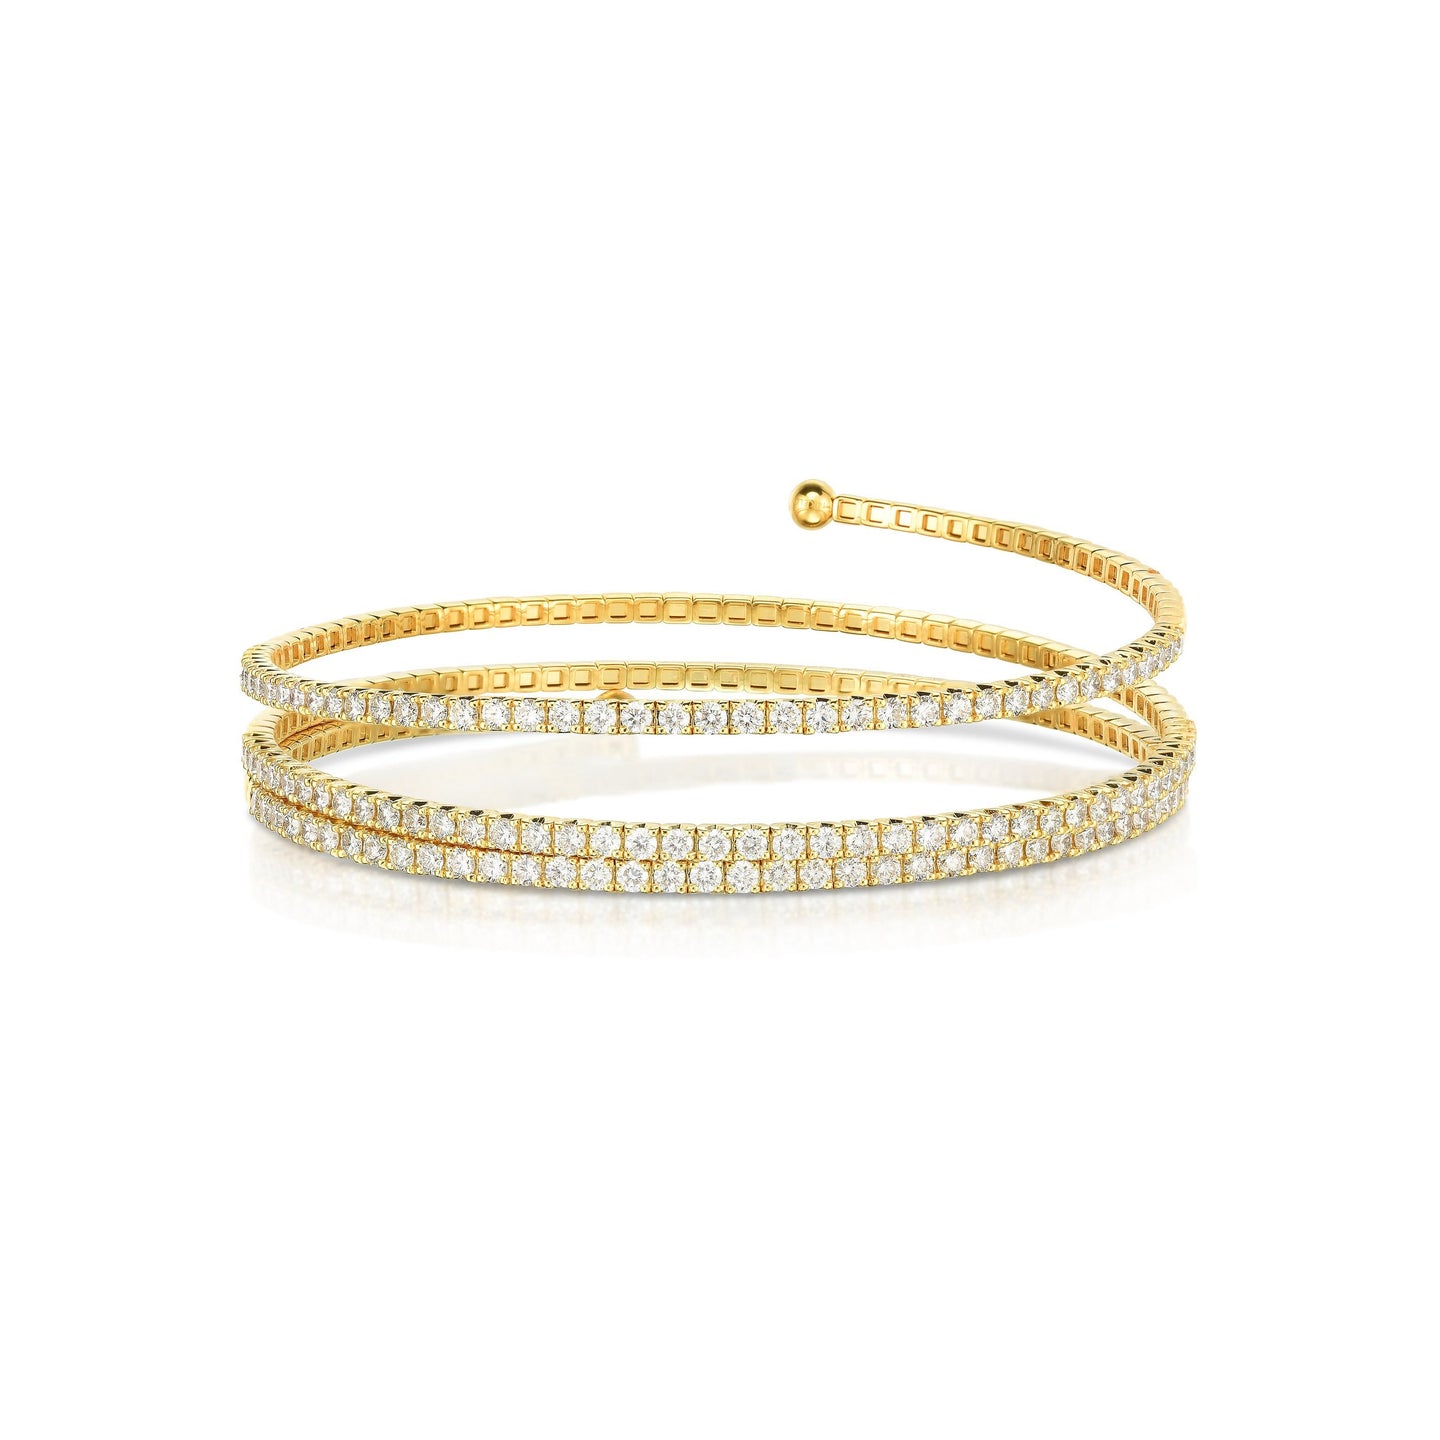 Sabel Collection 14K Yellow Gold Three Row Coil Bracelet